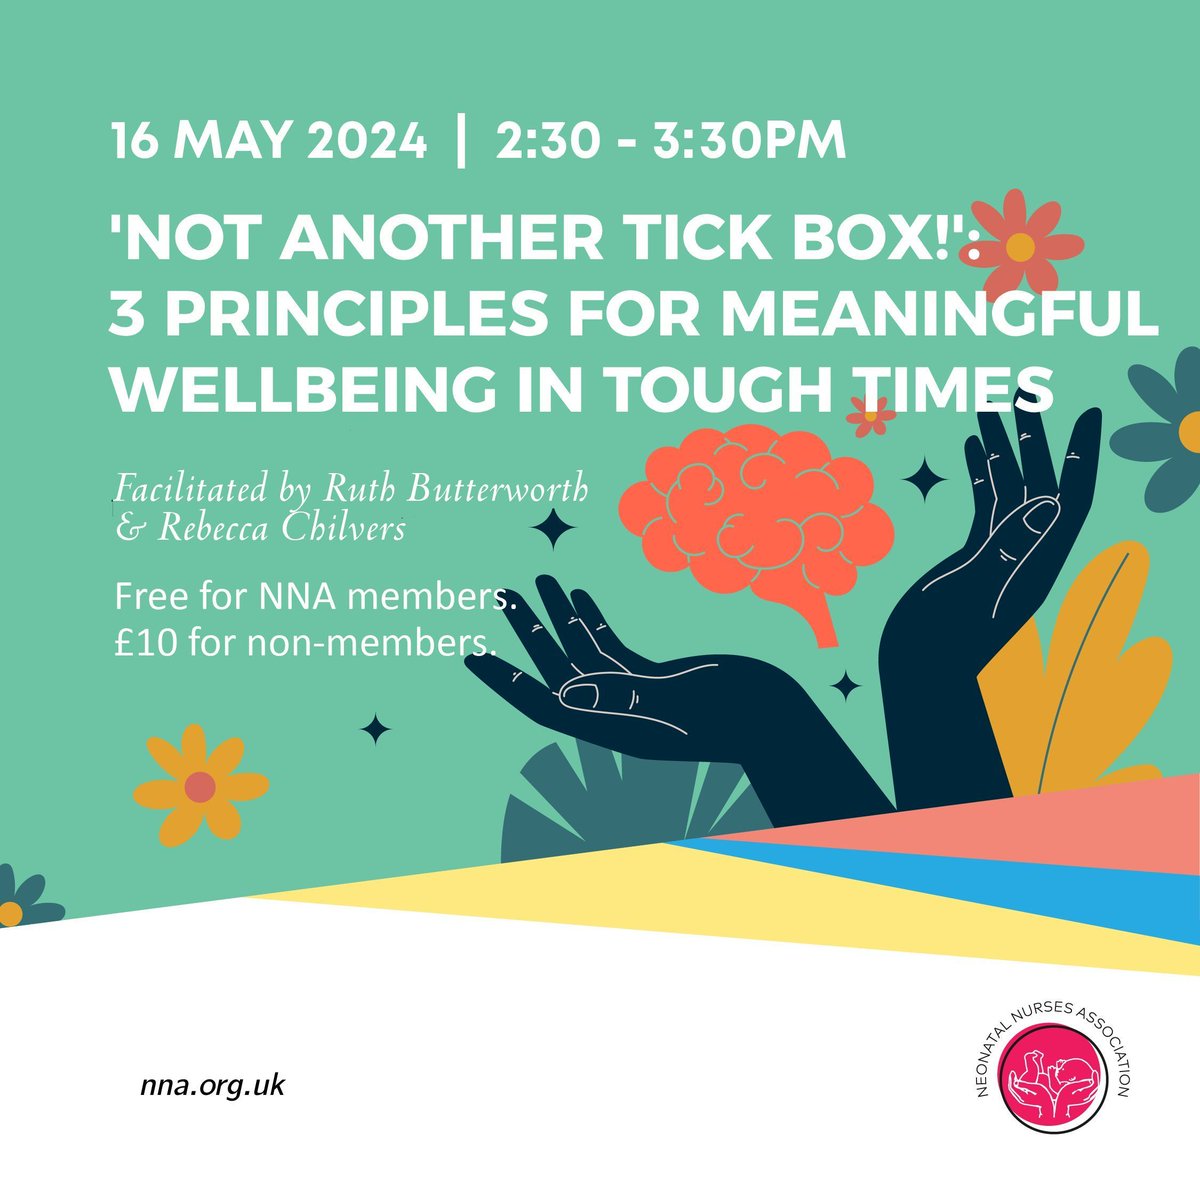 Today we're hosting two exclusive wellbeing events facilitated by Dr Ruth Butterworth and Dr Rebecca Chilvers, Consultant Clinical Psychologists who specialise in neonatal care. Visit the events page to book your places: buff.ly/3WIv4s5 #MentalHealthAwarenessWeek2024